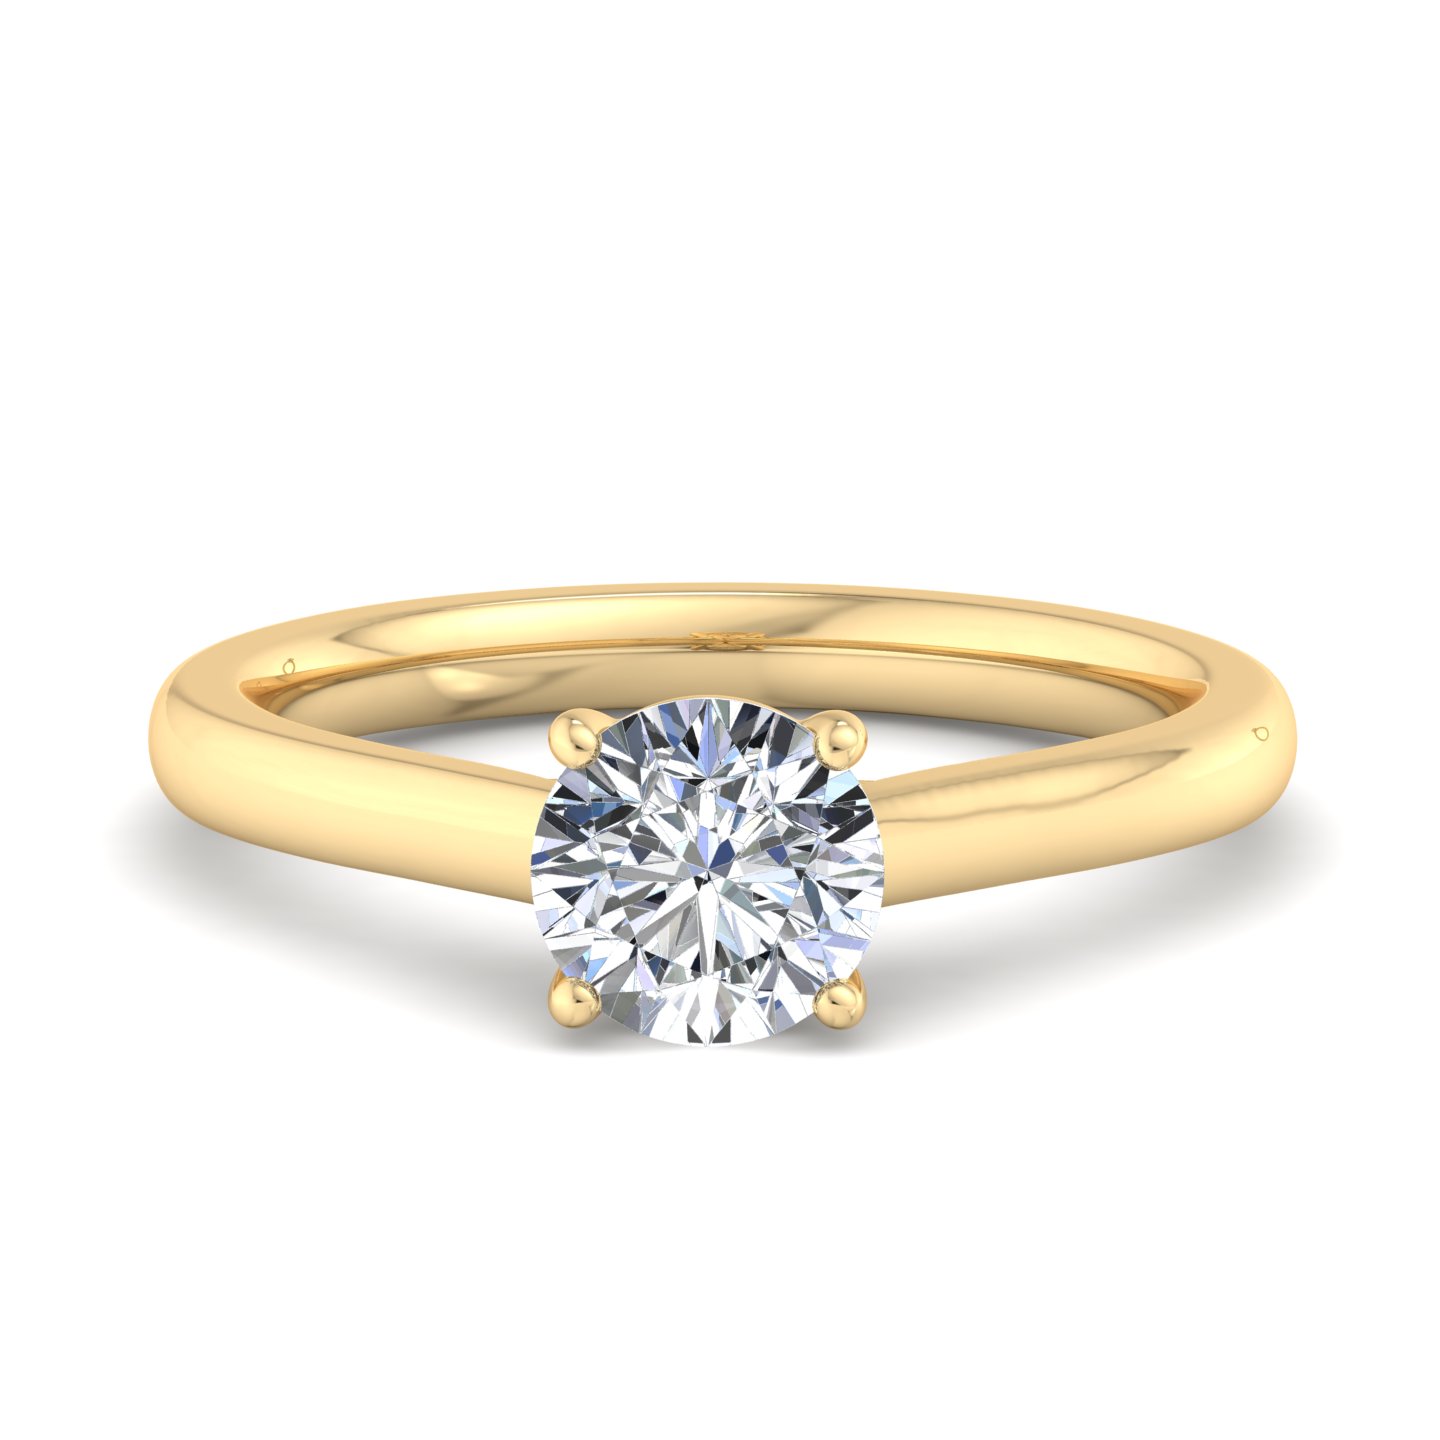 Andrea Solitaire engagement ring